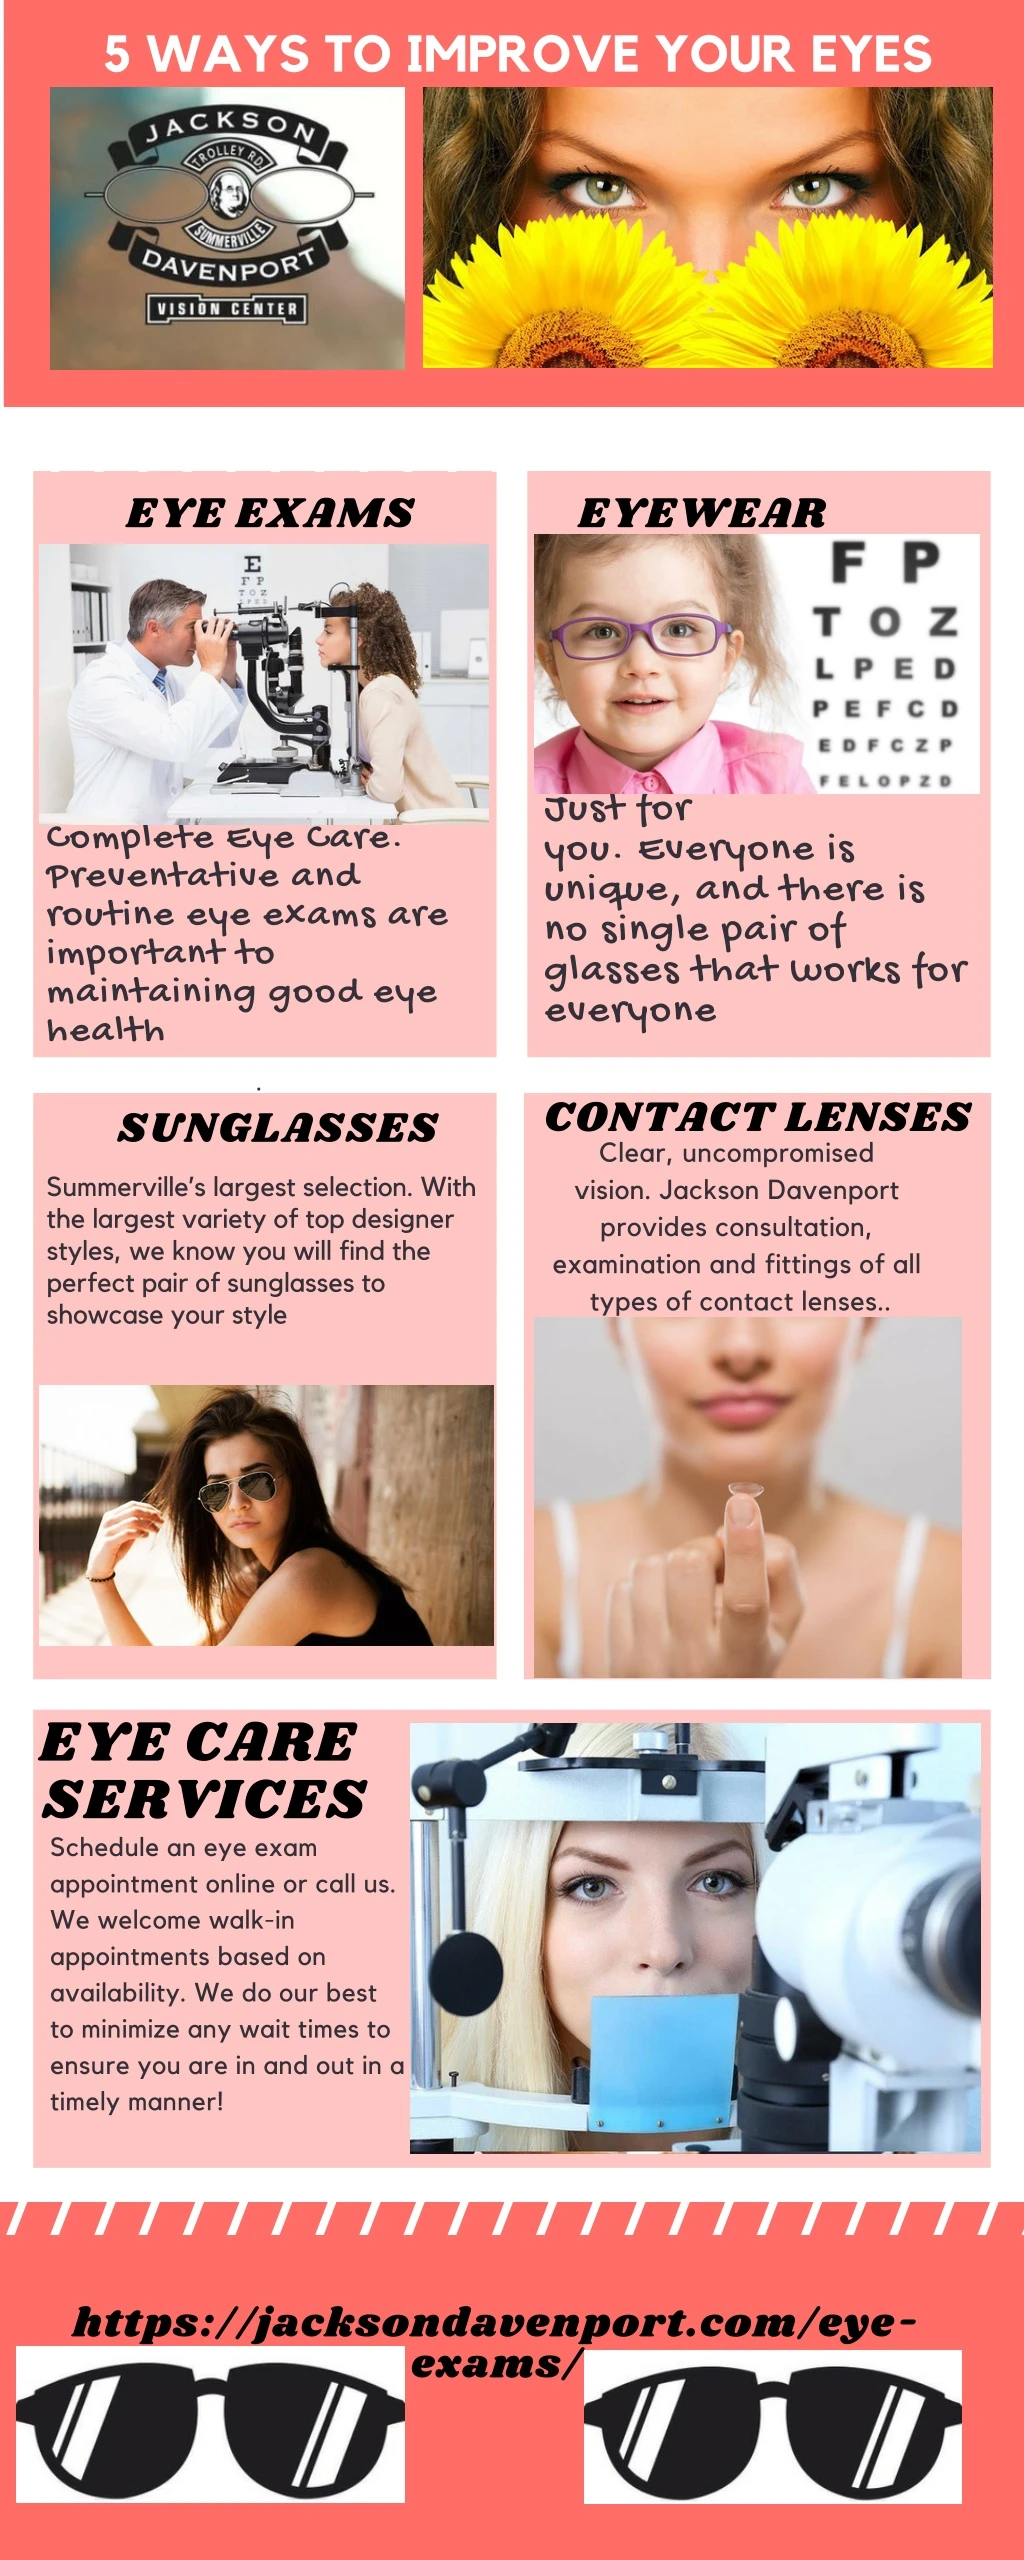 5 ways to improve your eyes